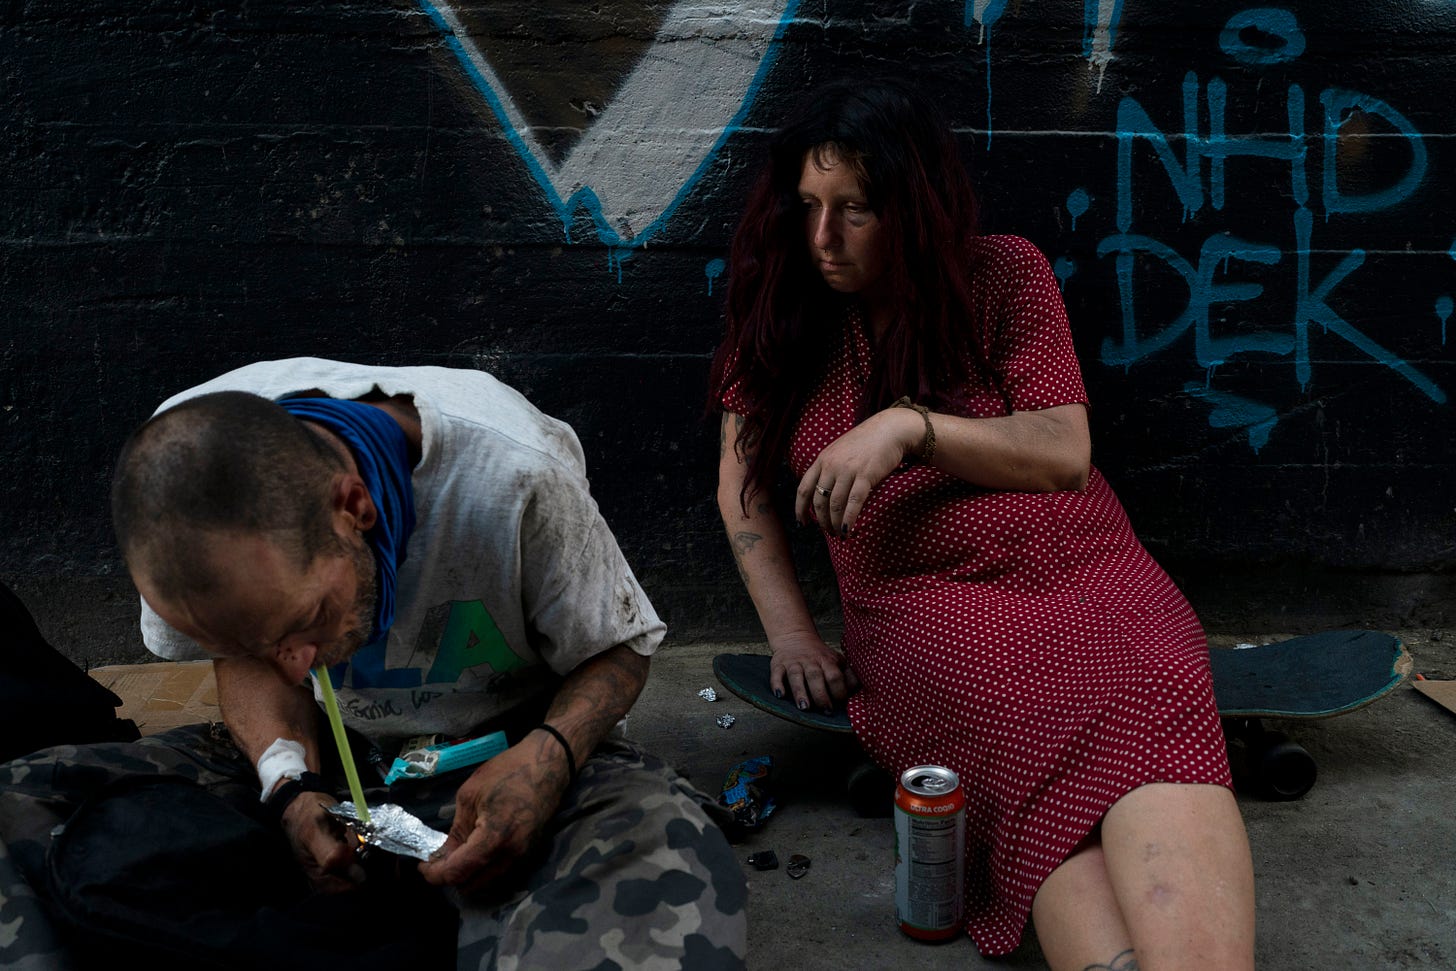 Photos: Fentanyl's scourge plainly visible on streets of Los Angeles  (warning: graphic images)